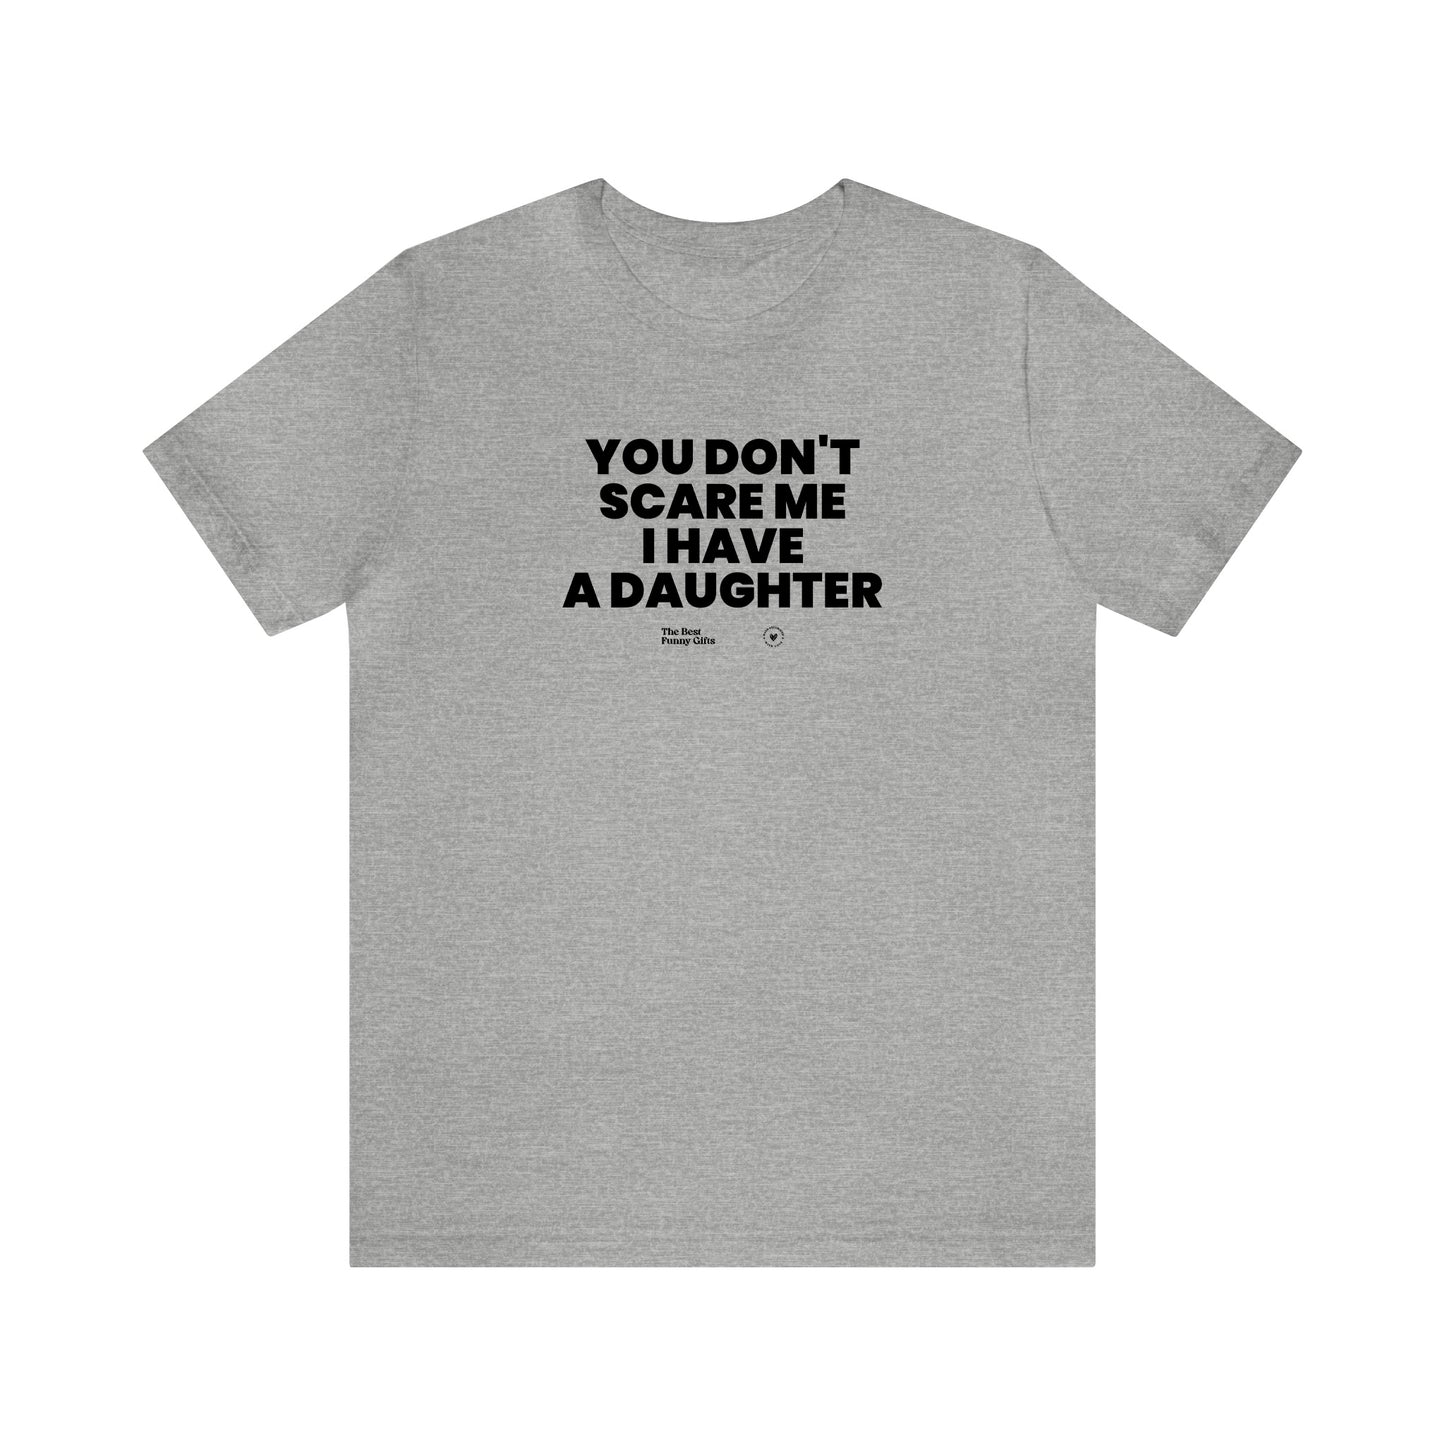 Mens T Shirts - You Don't Scare Me I Have a Daughter - Funny Men T Shirts